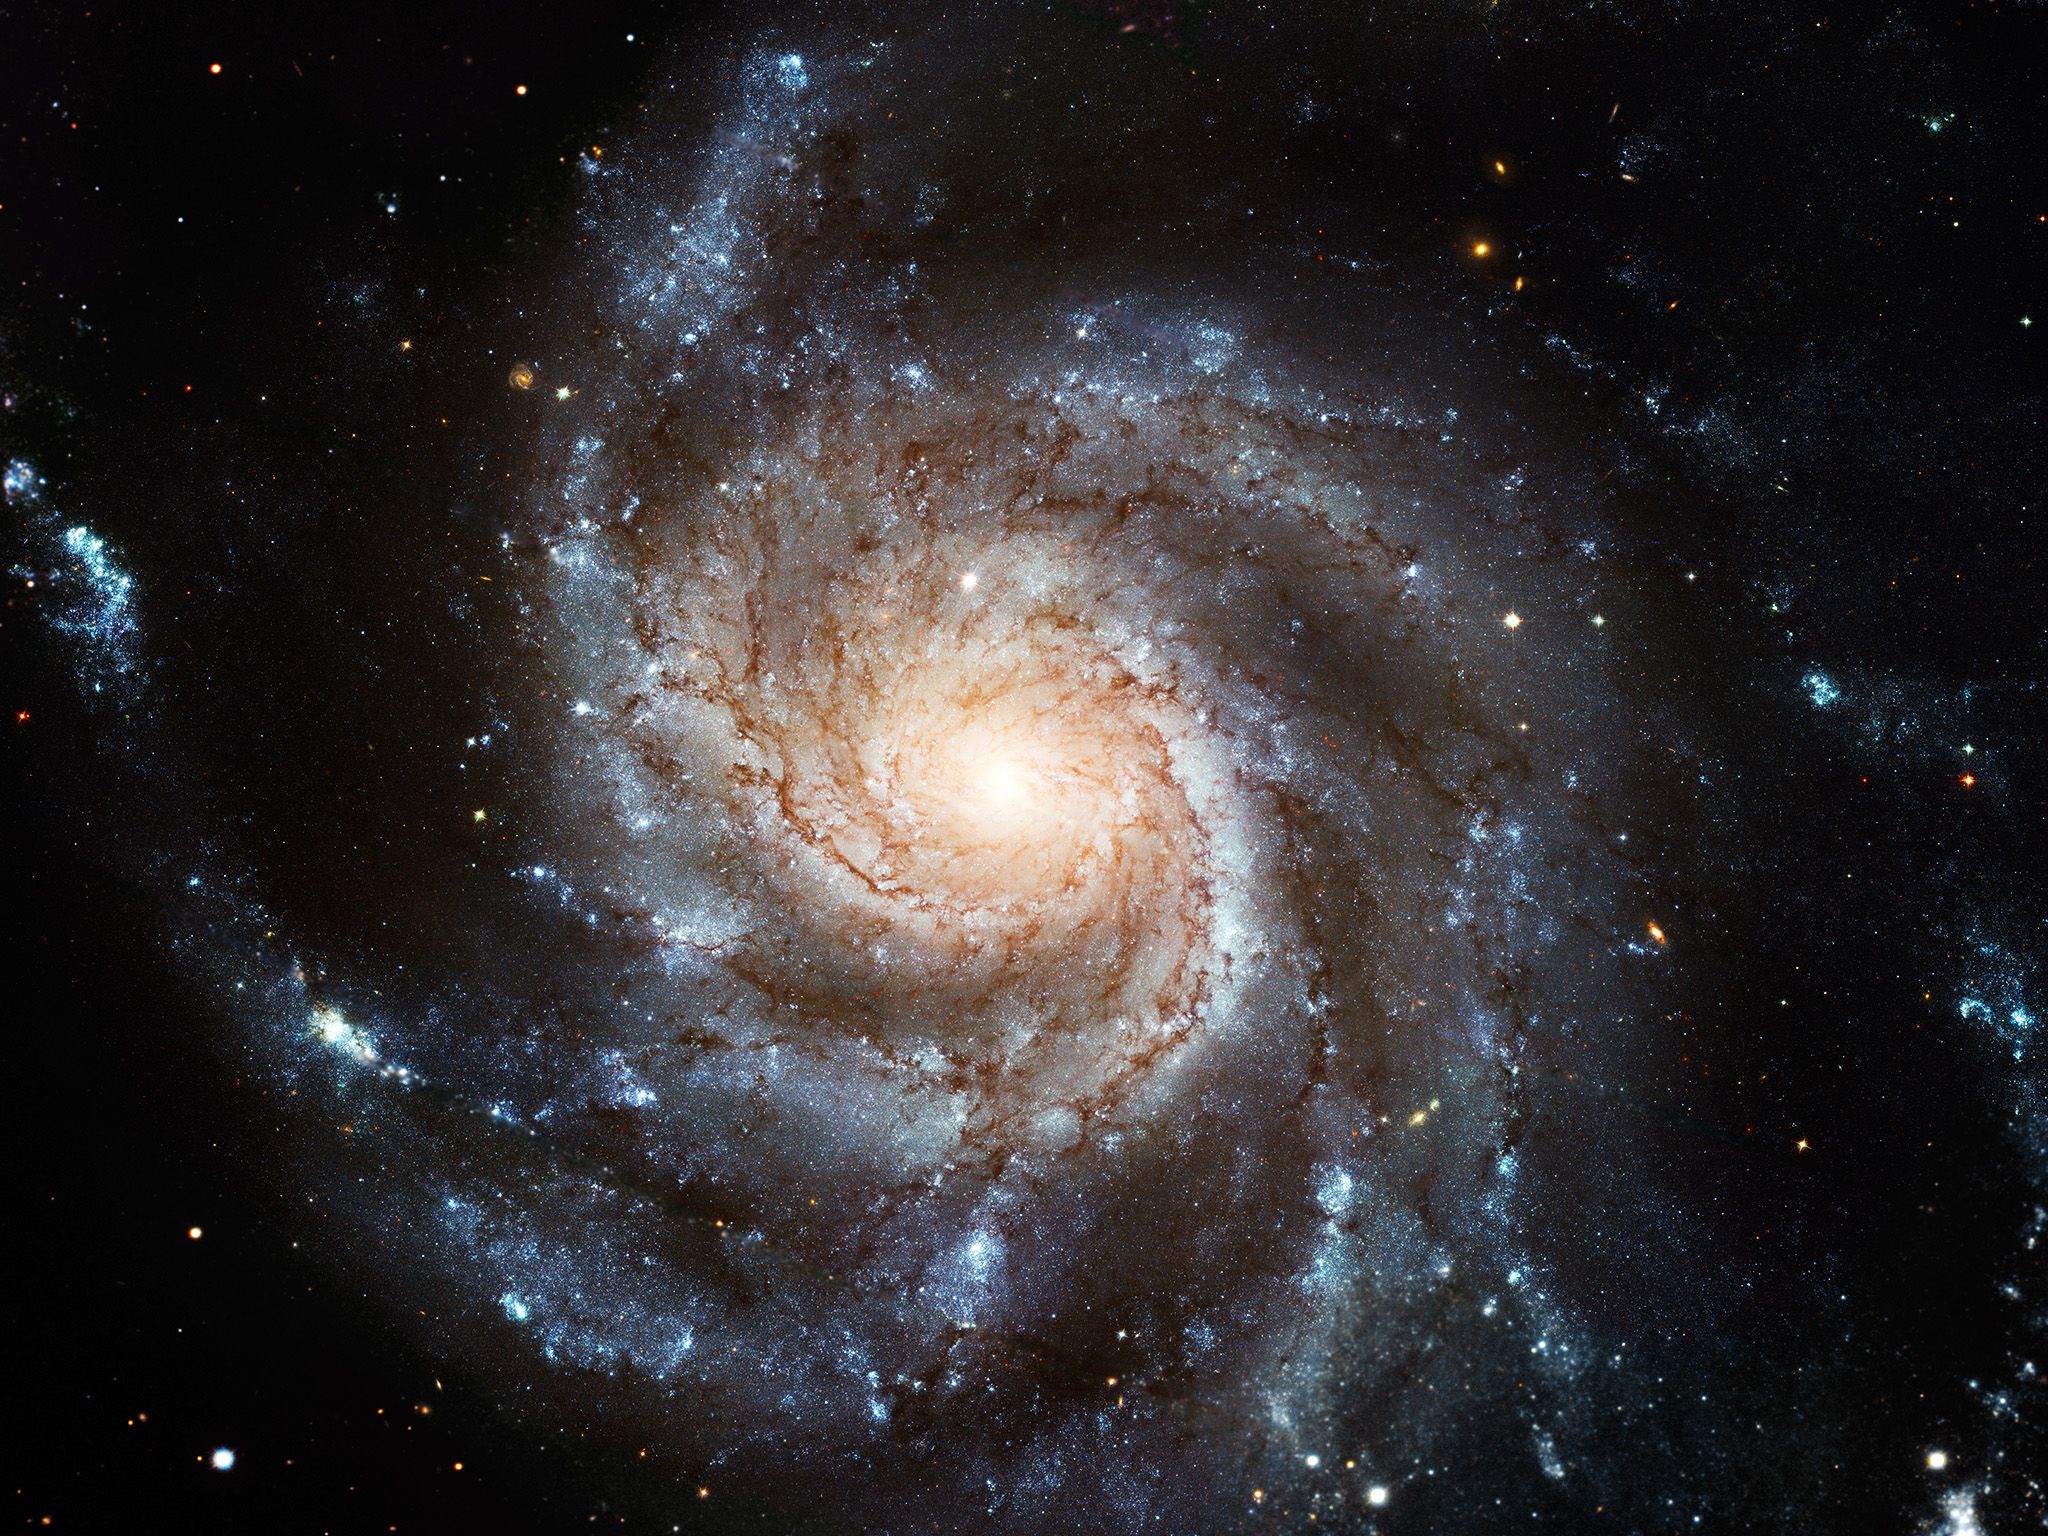 The Pin Wheel Galaxy. This image is from Hubble's Cosmic Journey. [Photo of the day - April 2015]